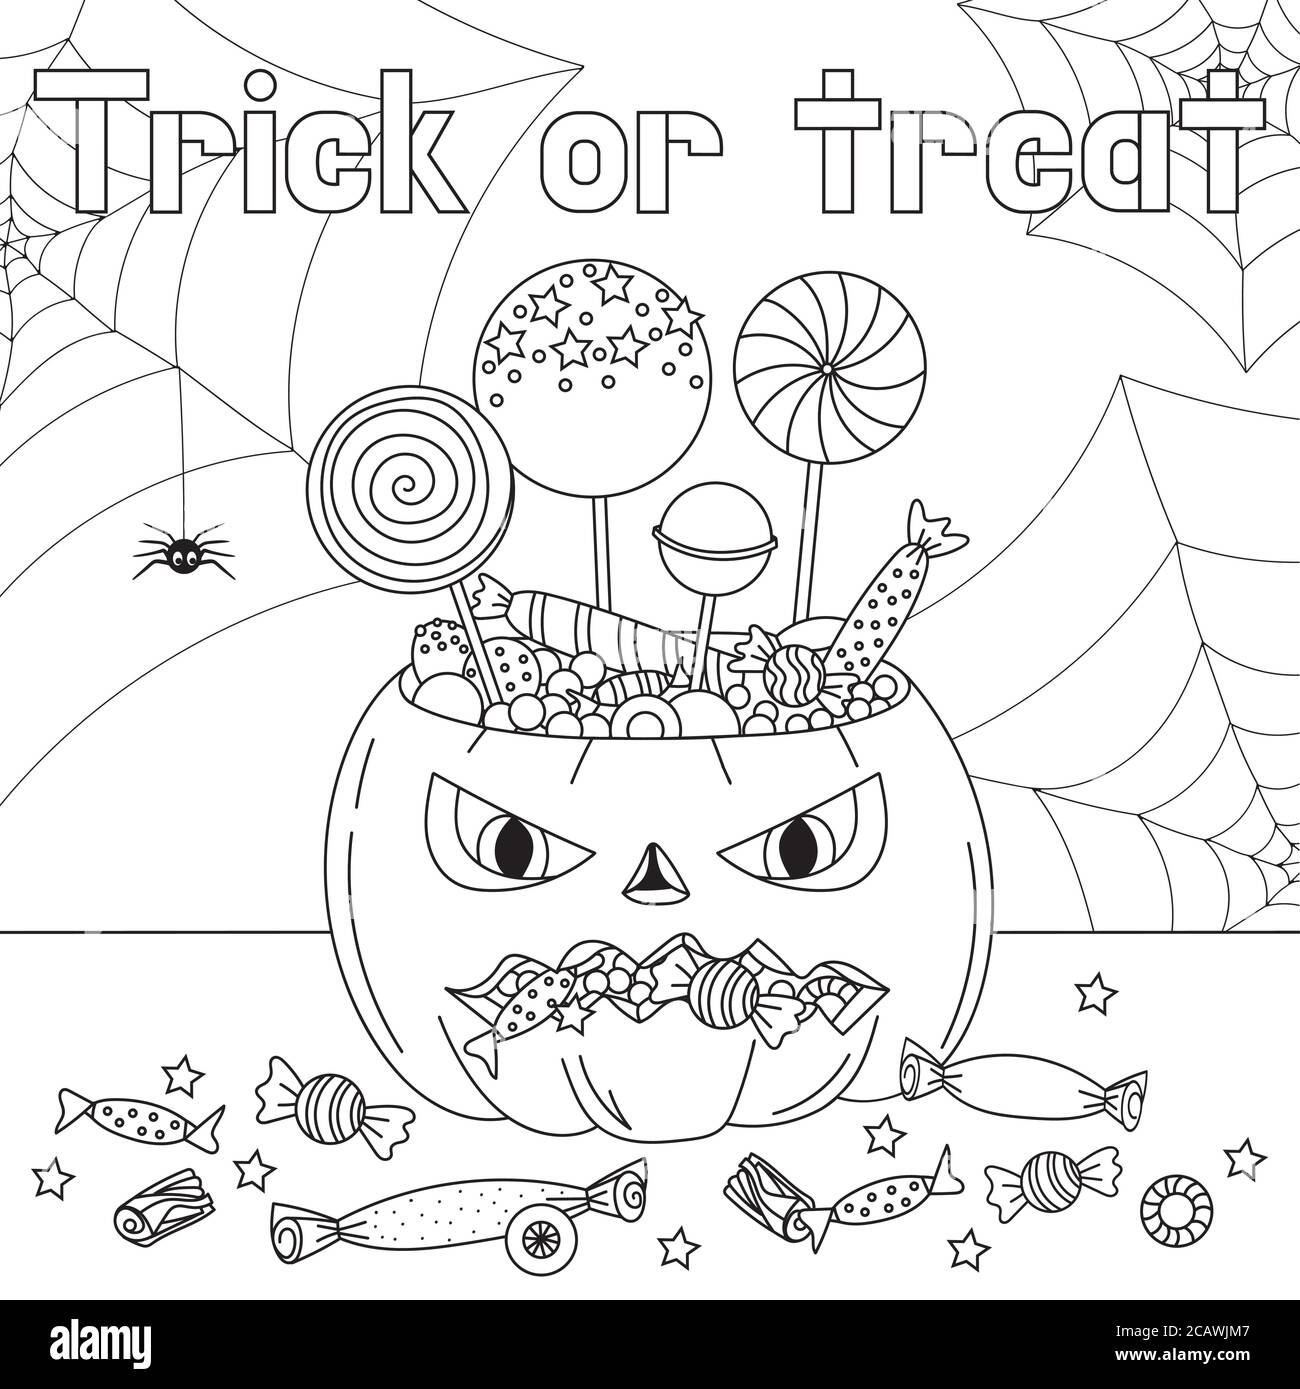 Trick or treat coloring page halloween coloring page for kids cartoon children in halloween costumes cute spider vector illustration stock vector image art